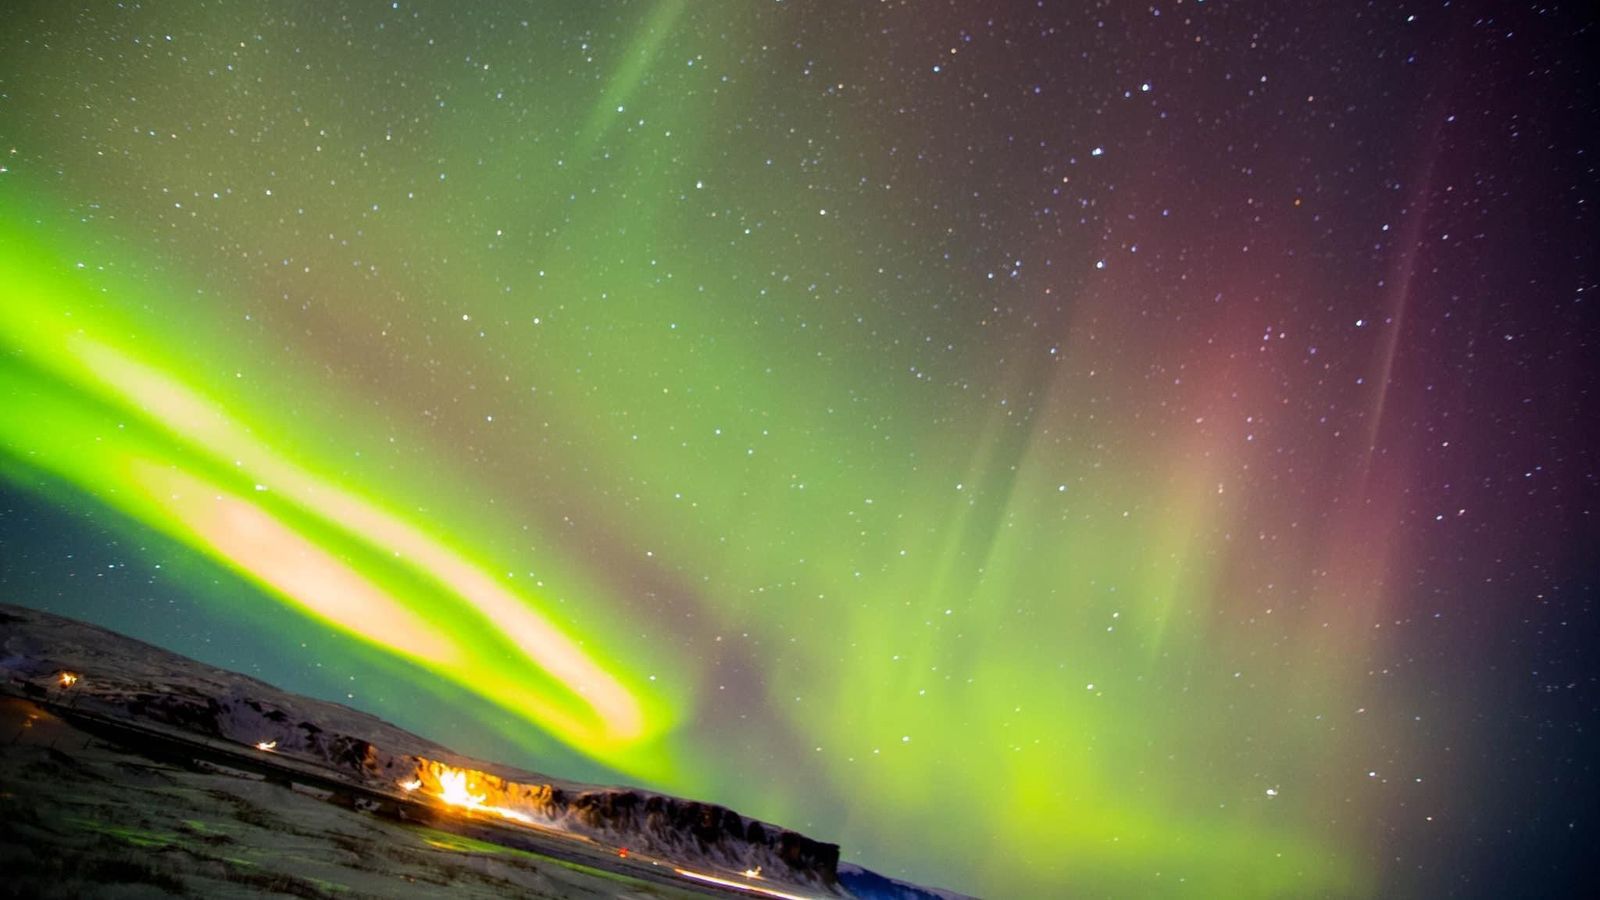 Spectacular photos capture Northern Lights above Iceland